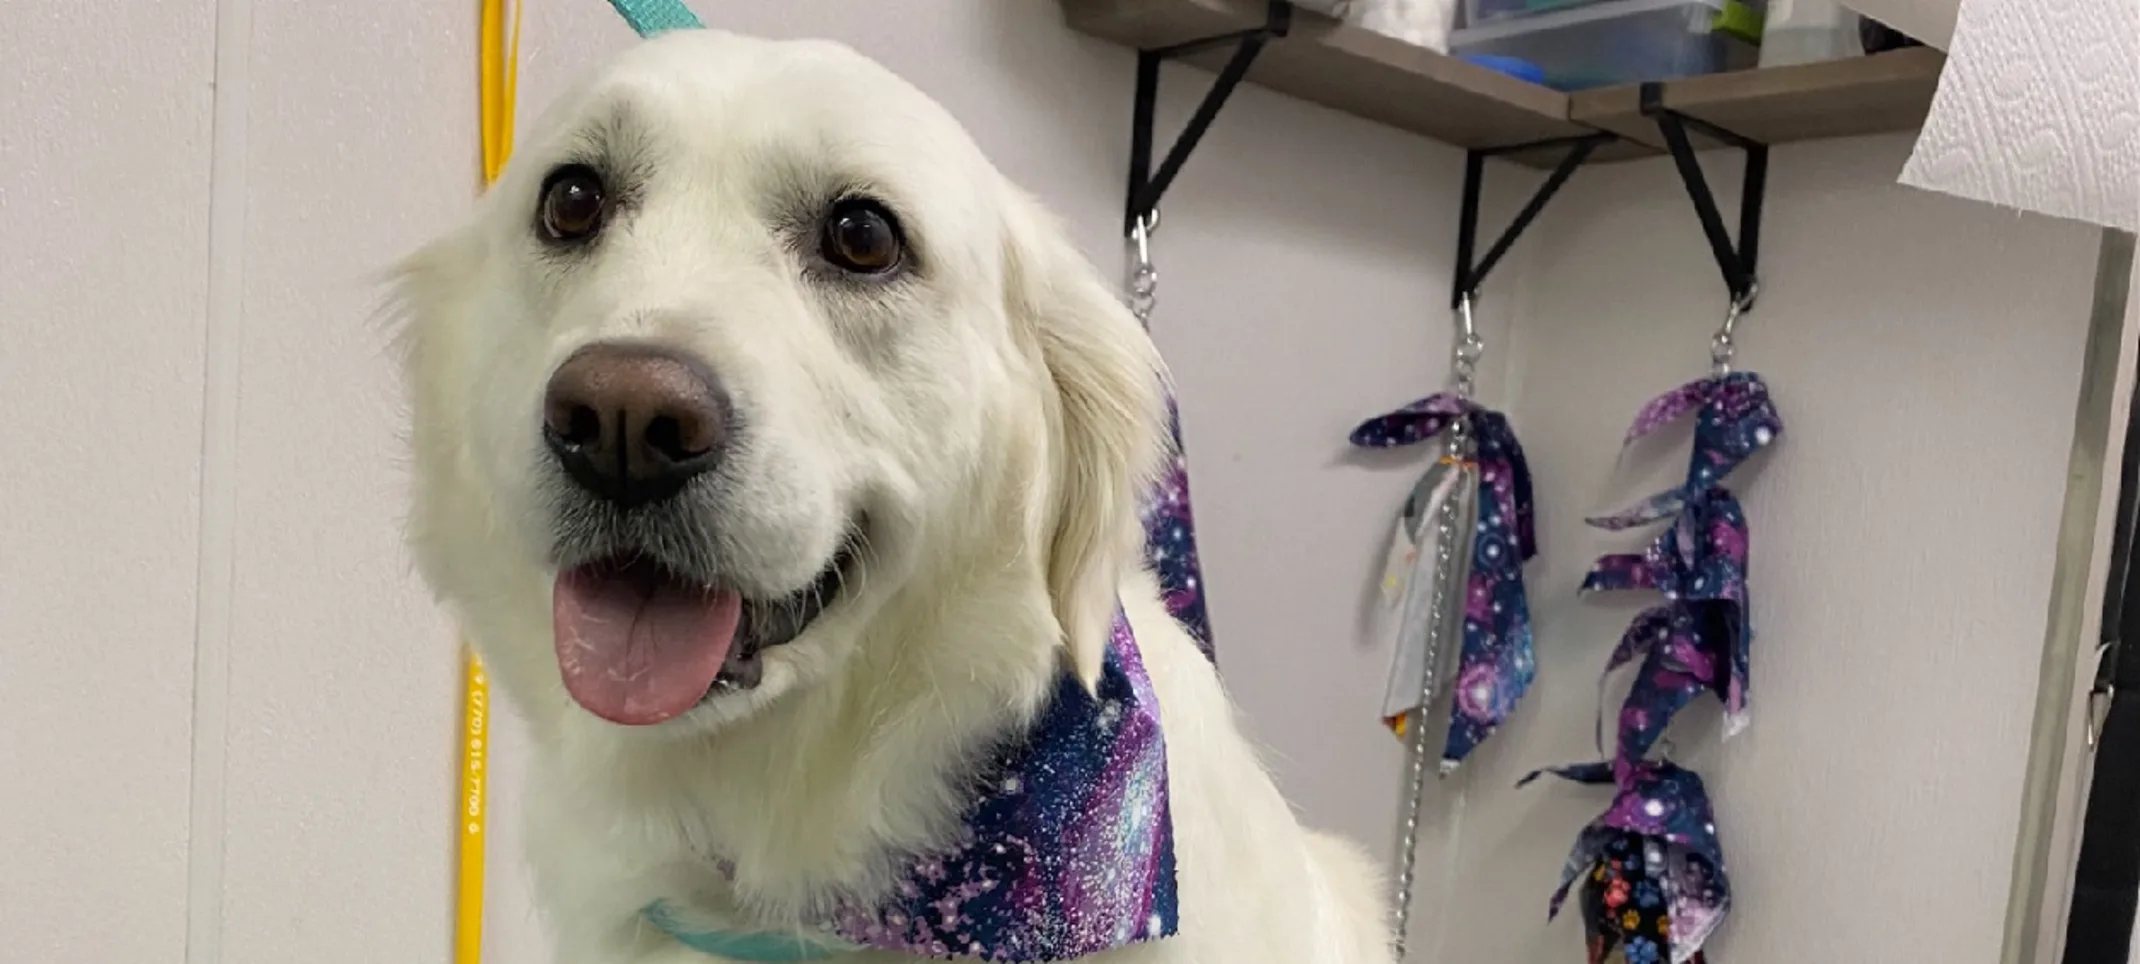 A golden retriever sitting on the grooming table